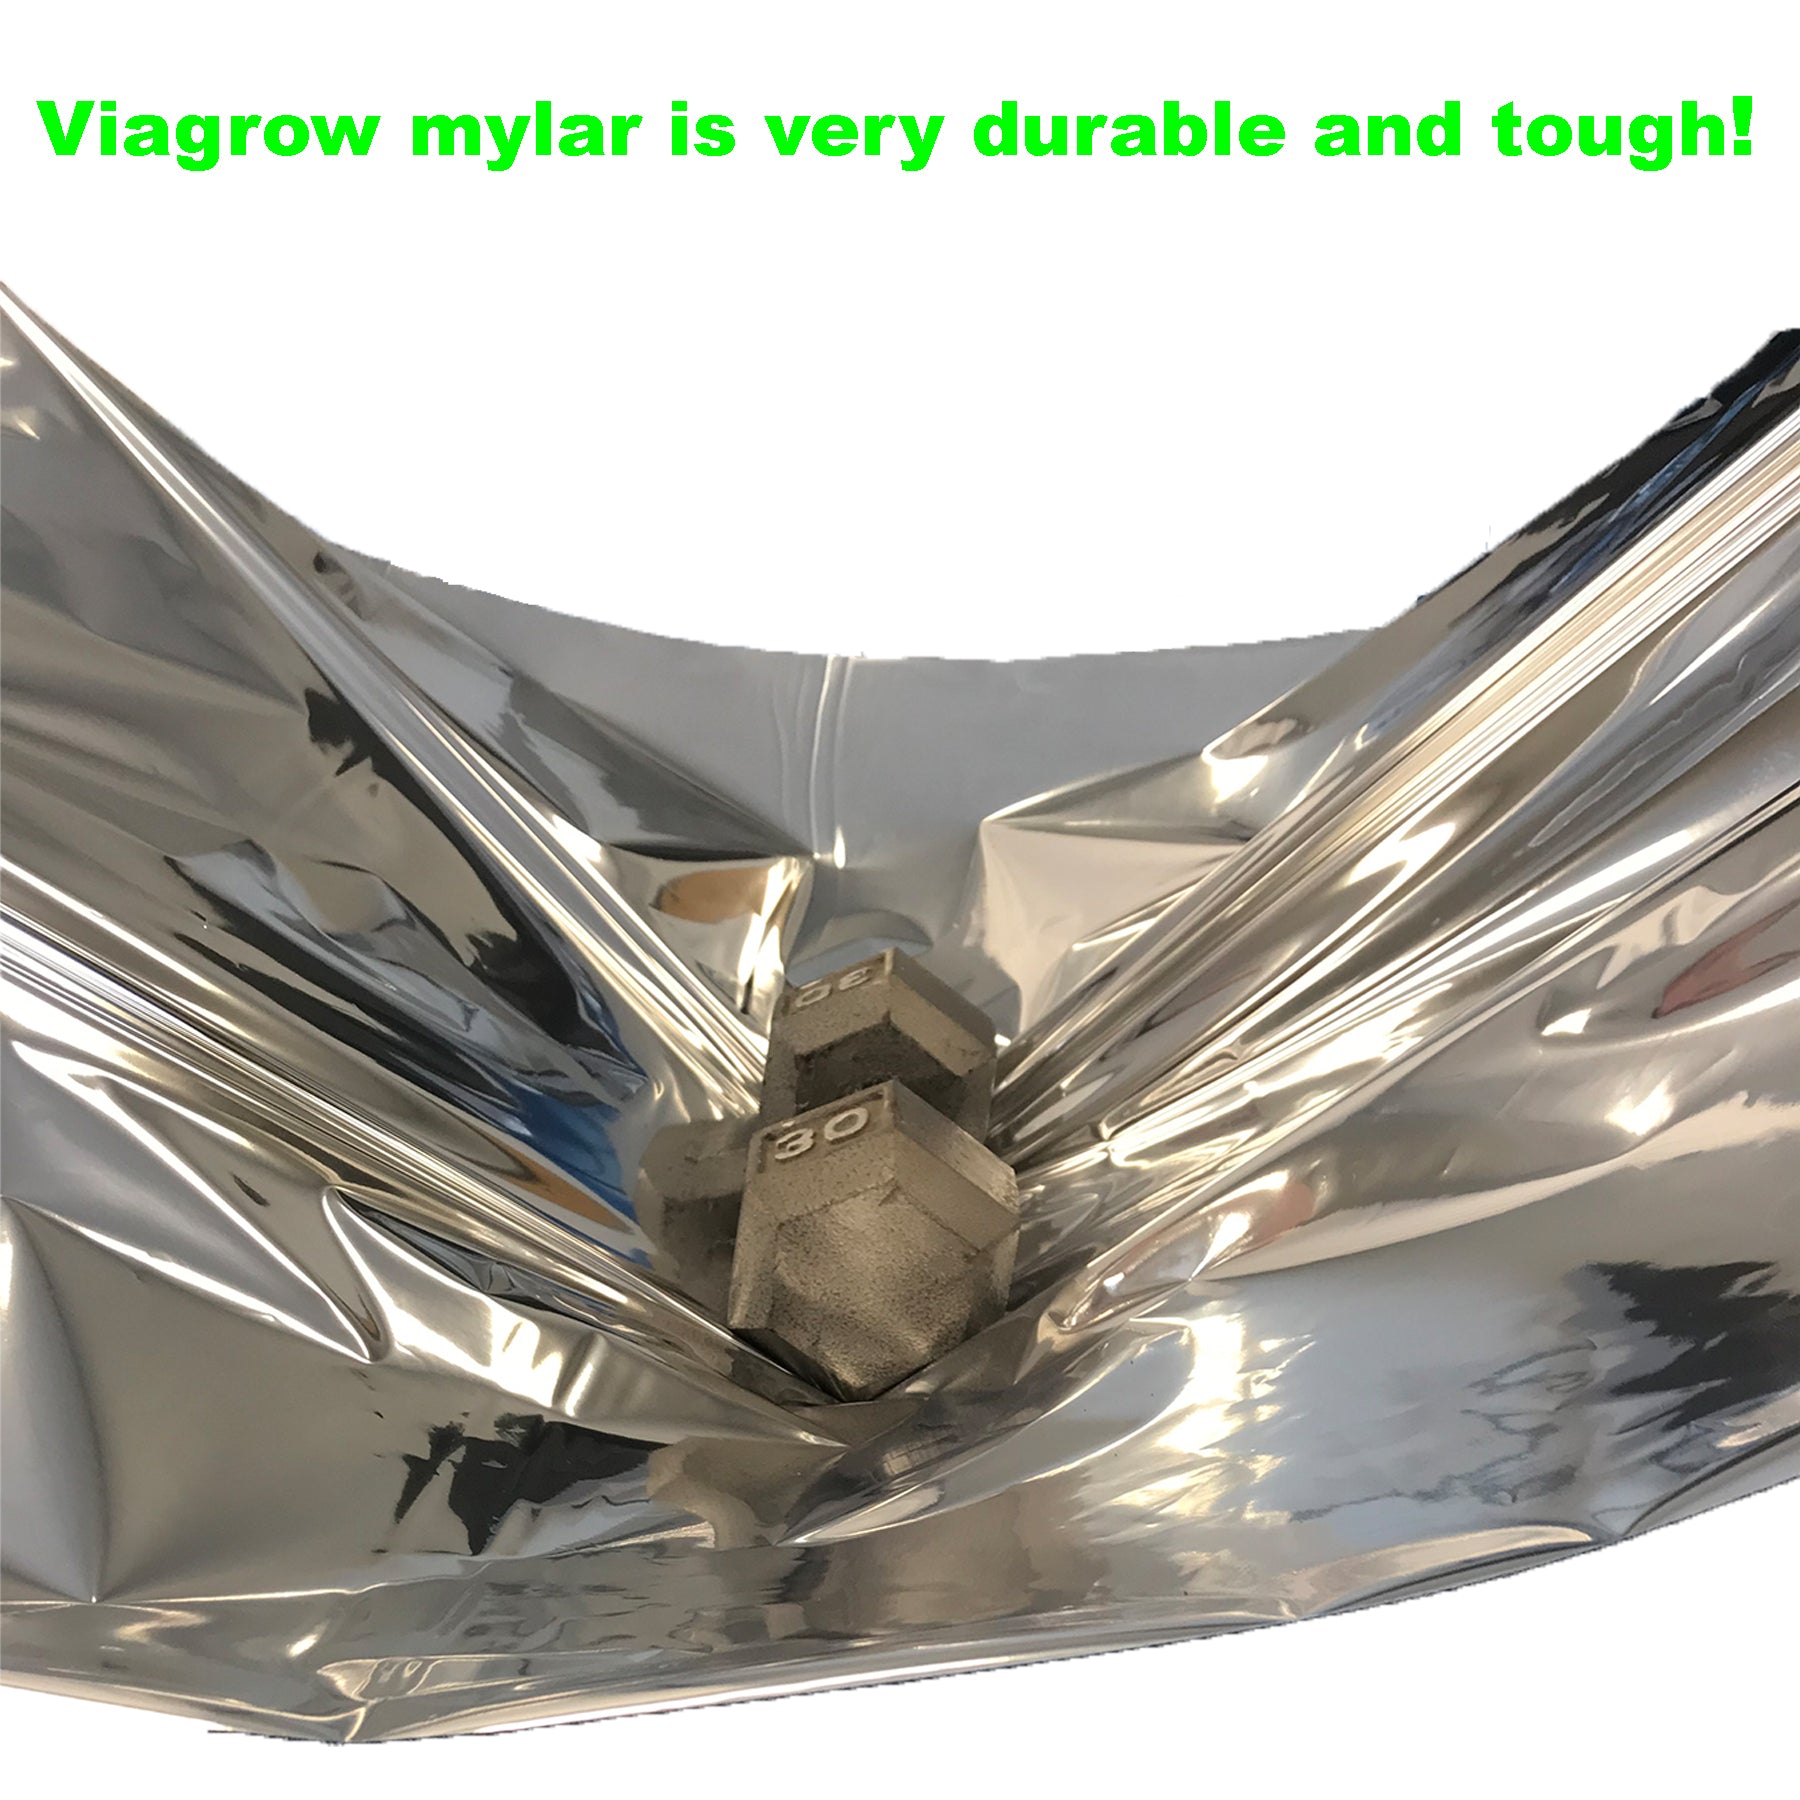 Viagrow Mylar Reflective Material, 50 feet, White/Silver (Case of 6)